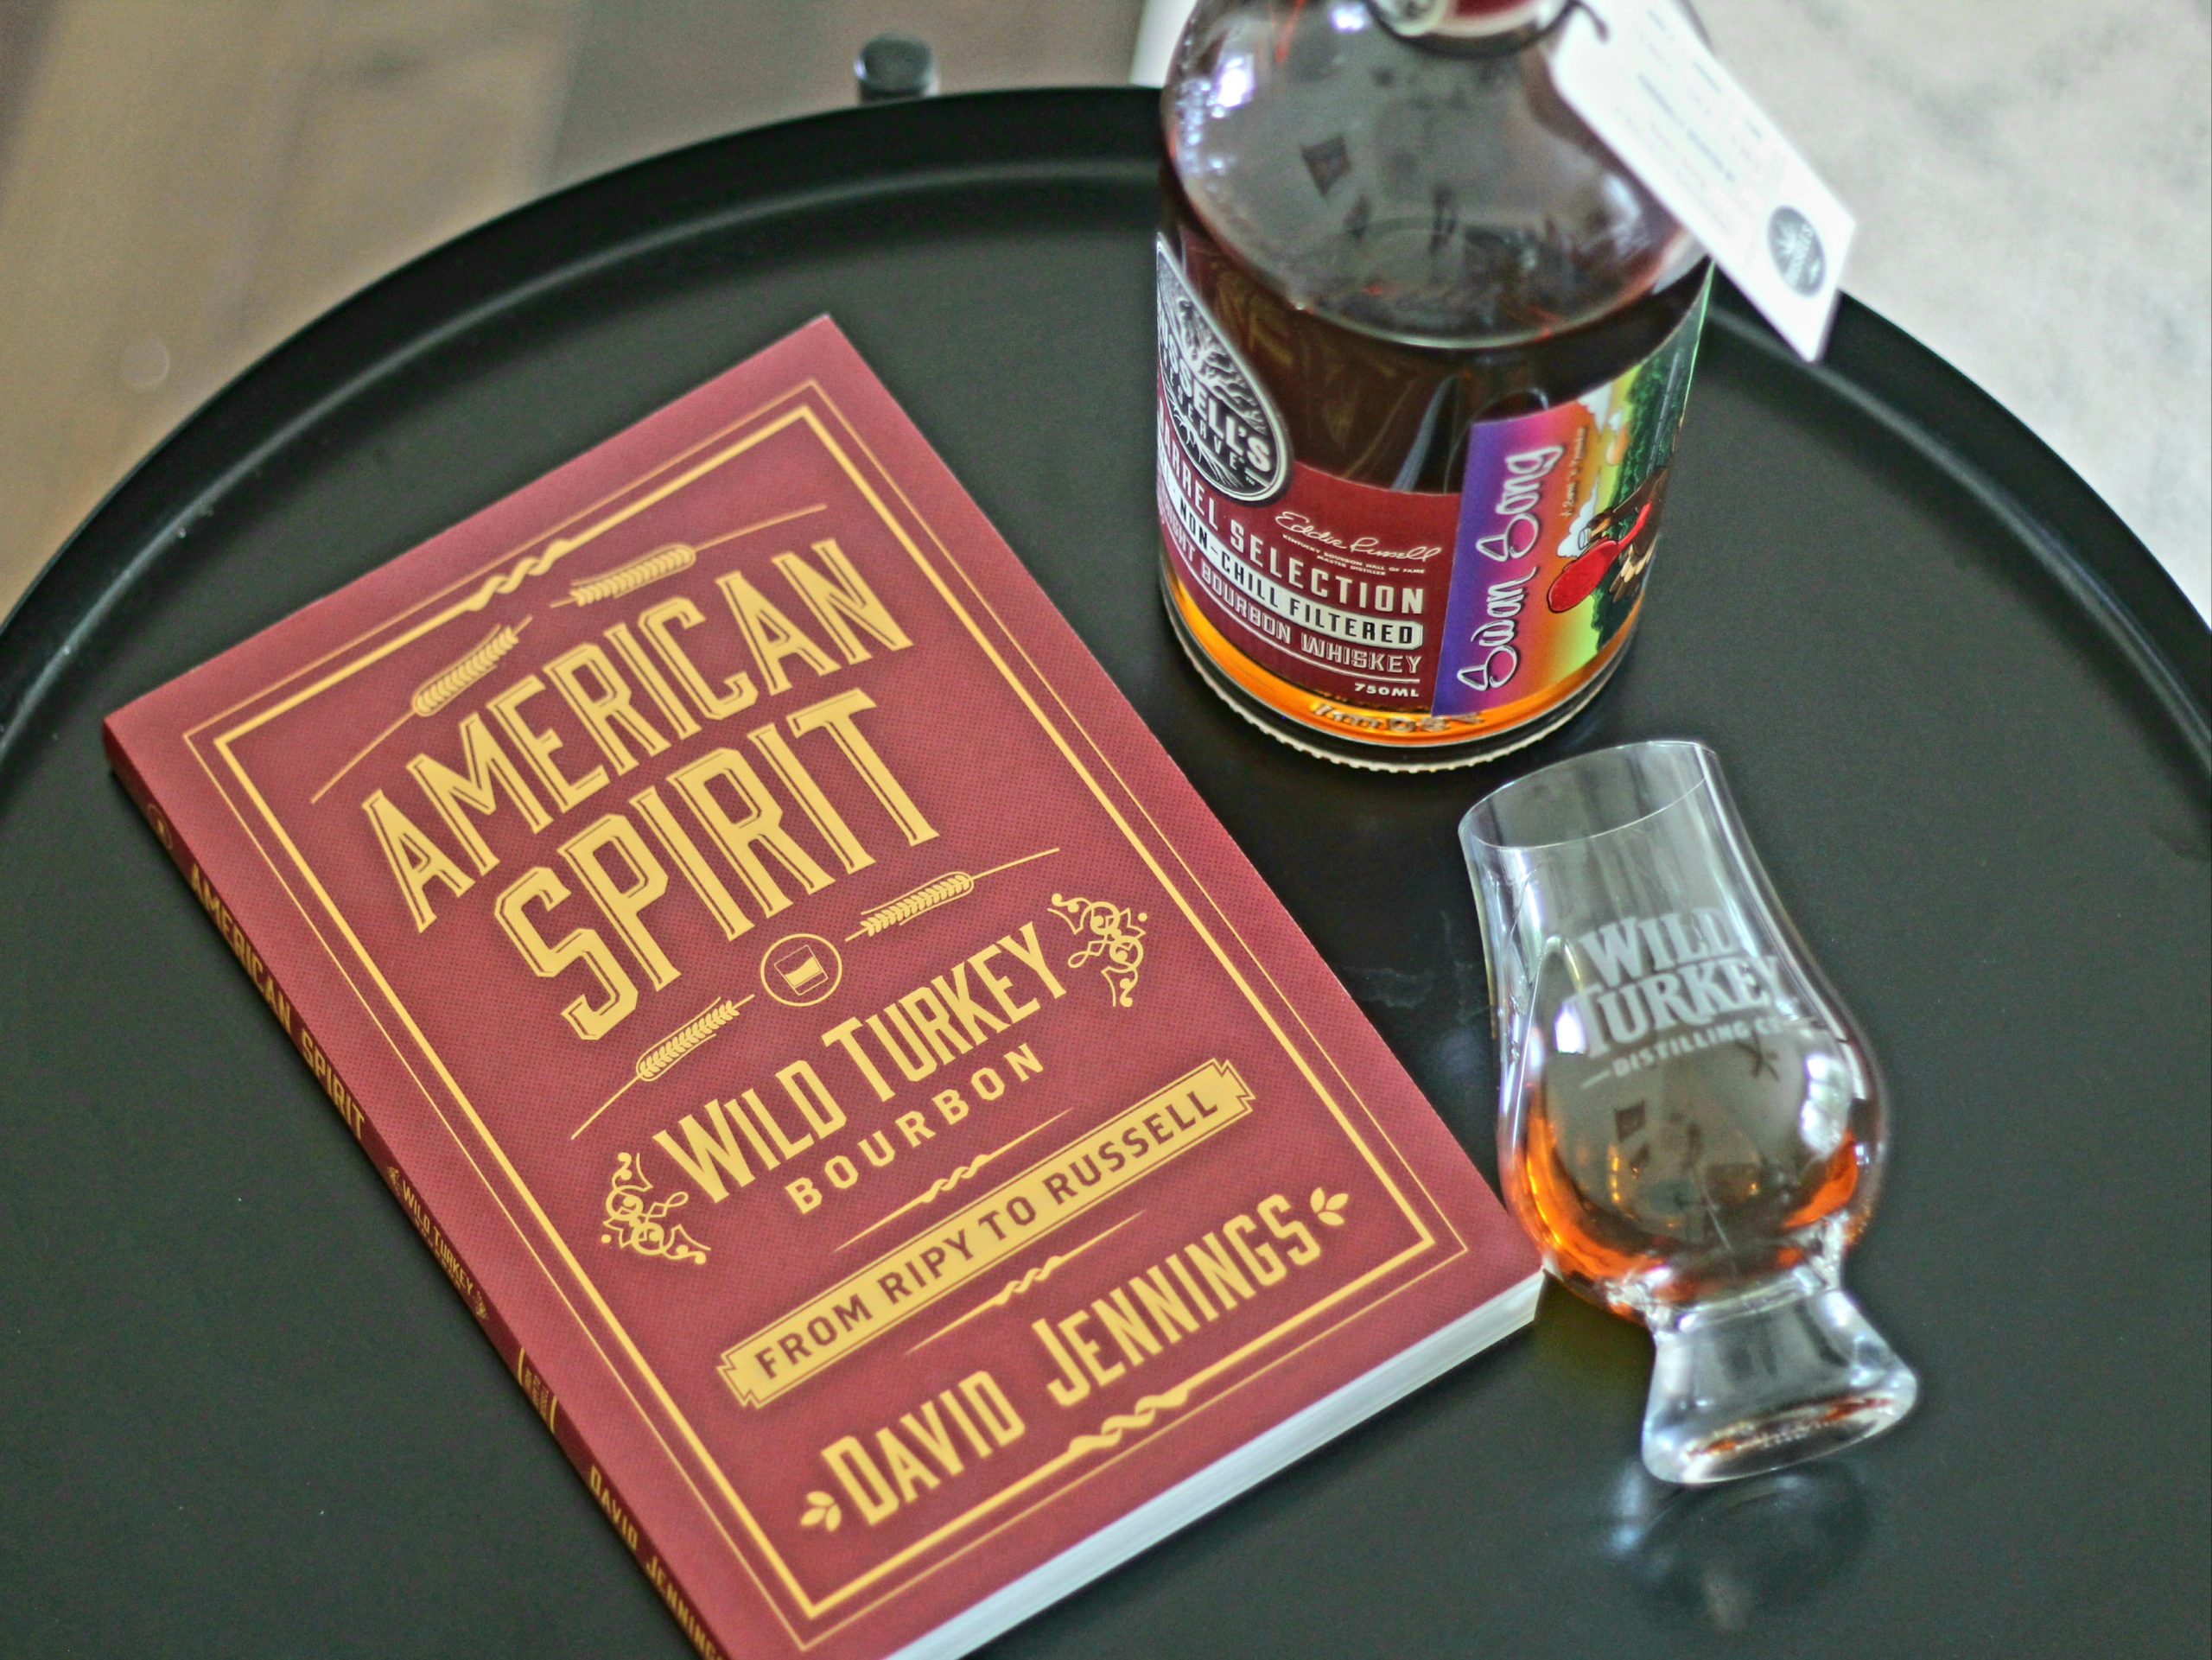 American Spirit: Wild Turkey Bourbon from Ripy to Russell Book Review